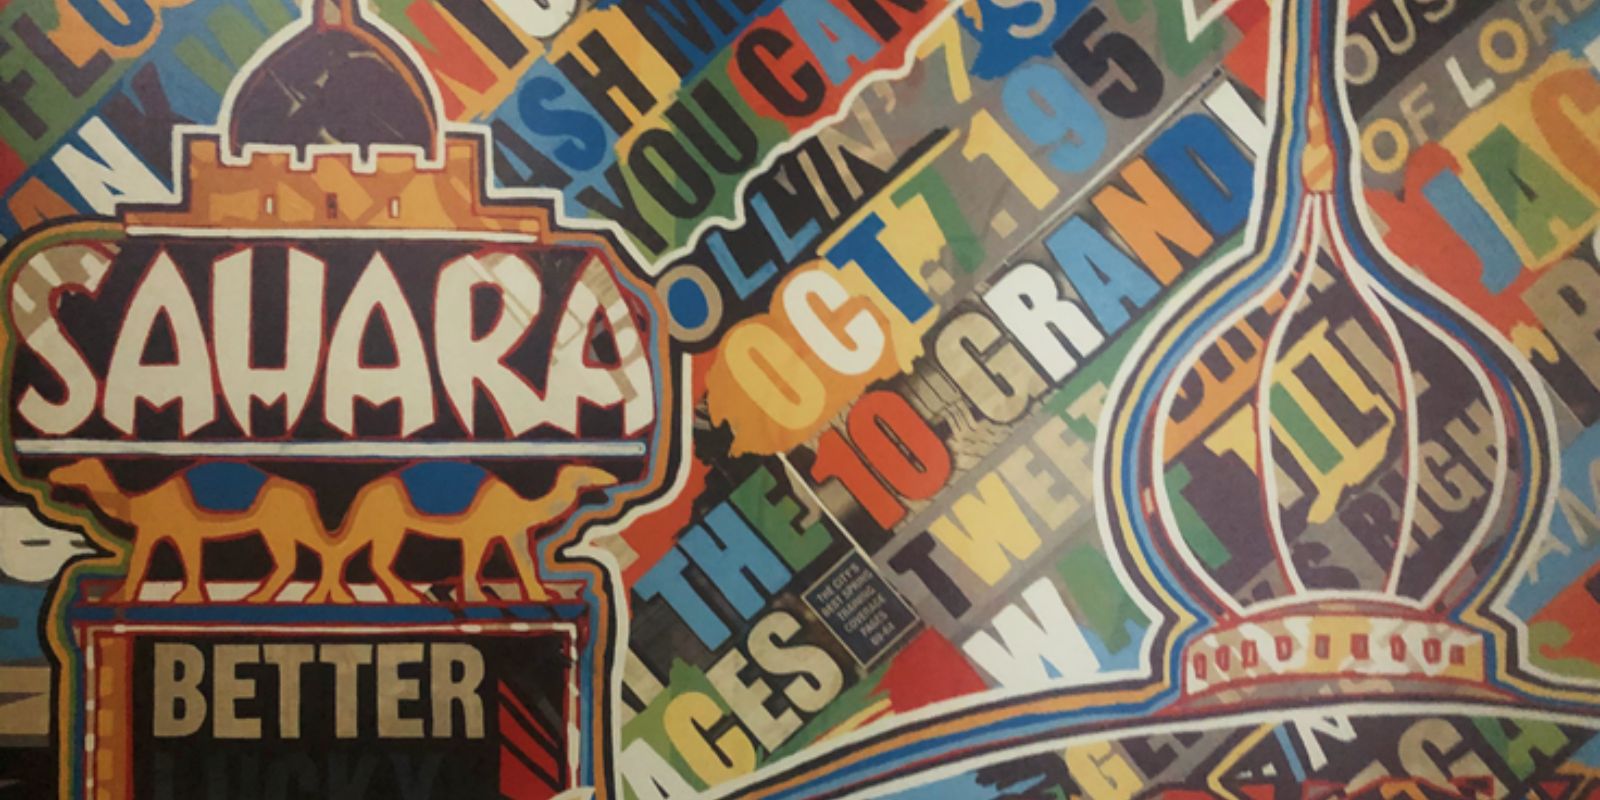 A picture of a painting from a hotel room that shows the old SAHARA logo, camels and is textured with lots of letters